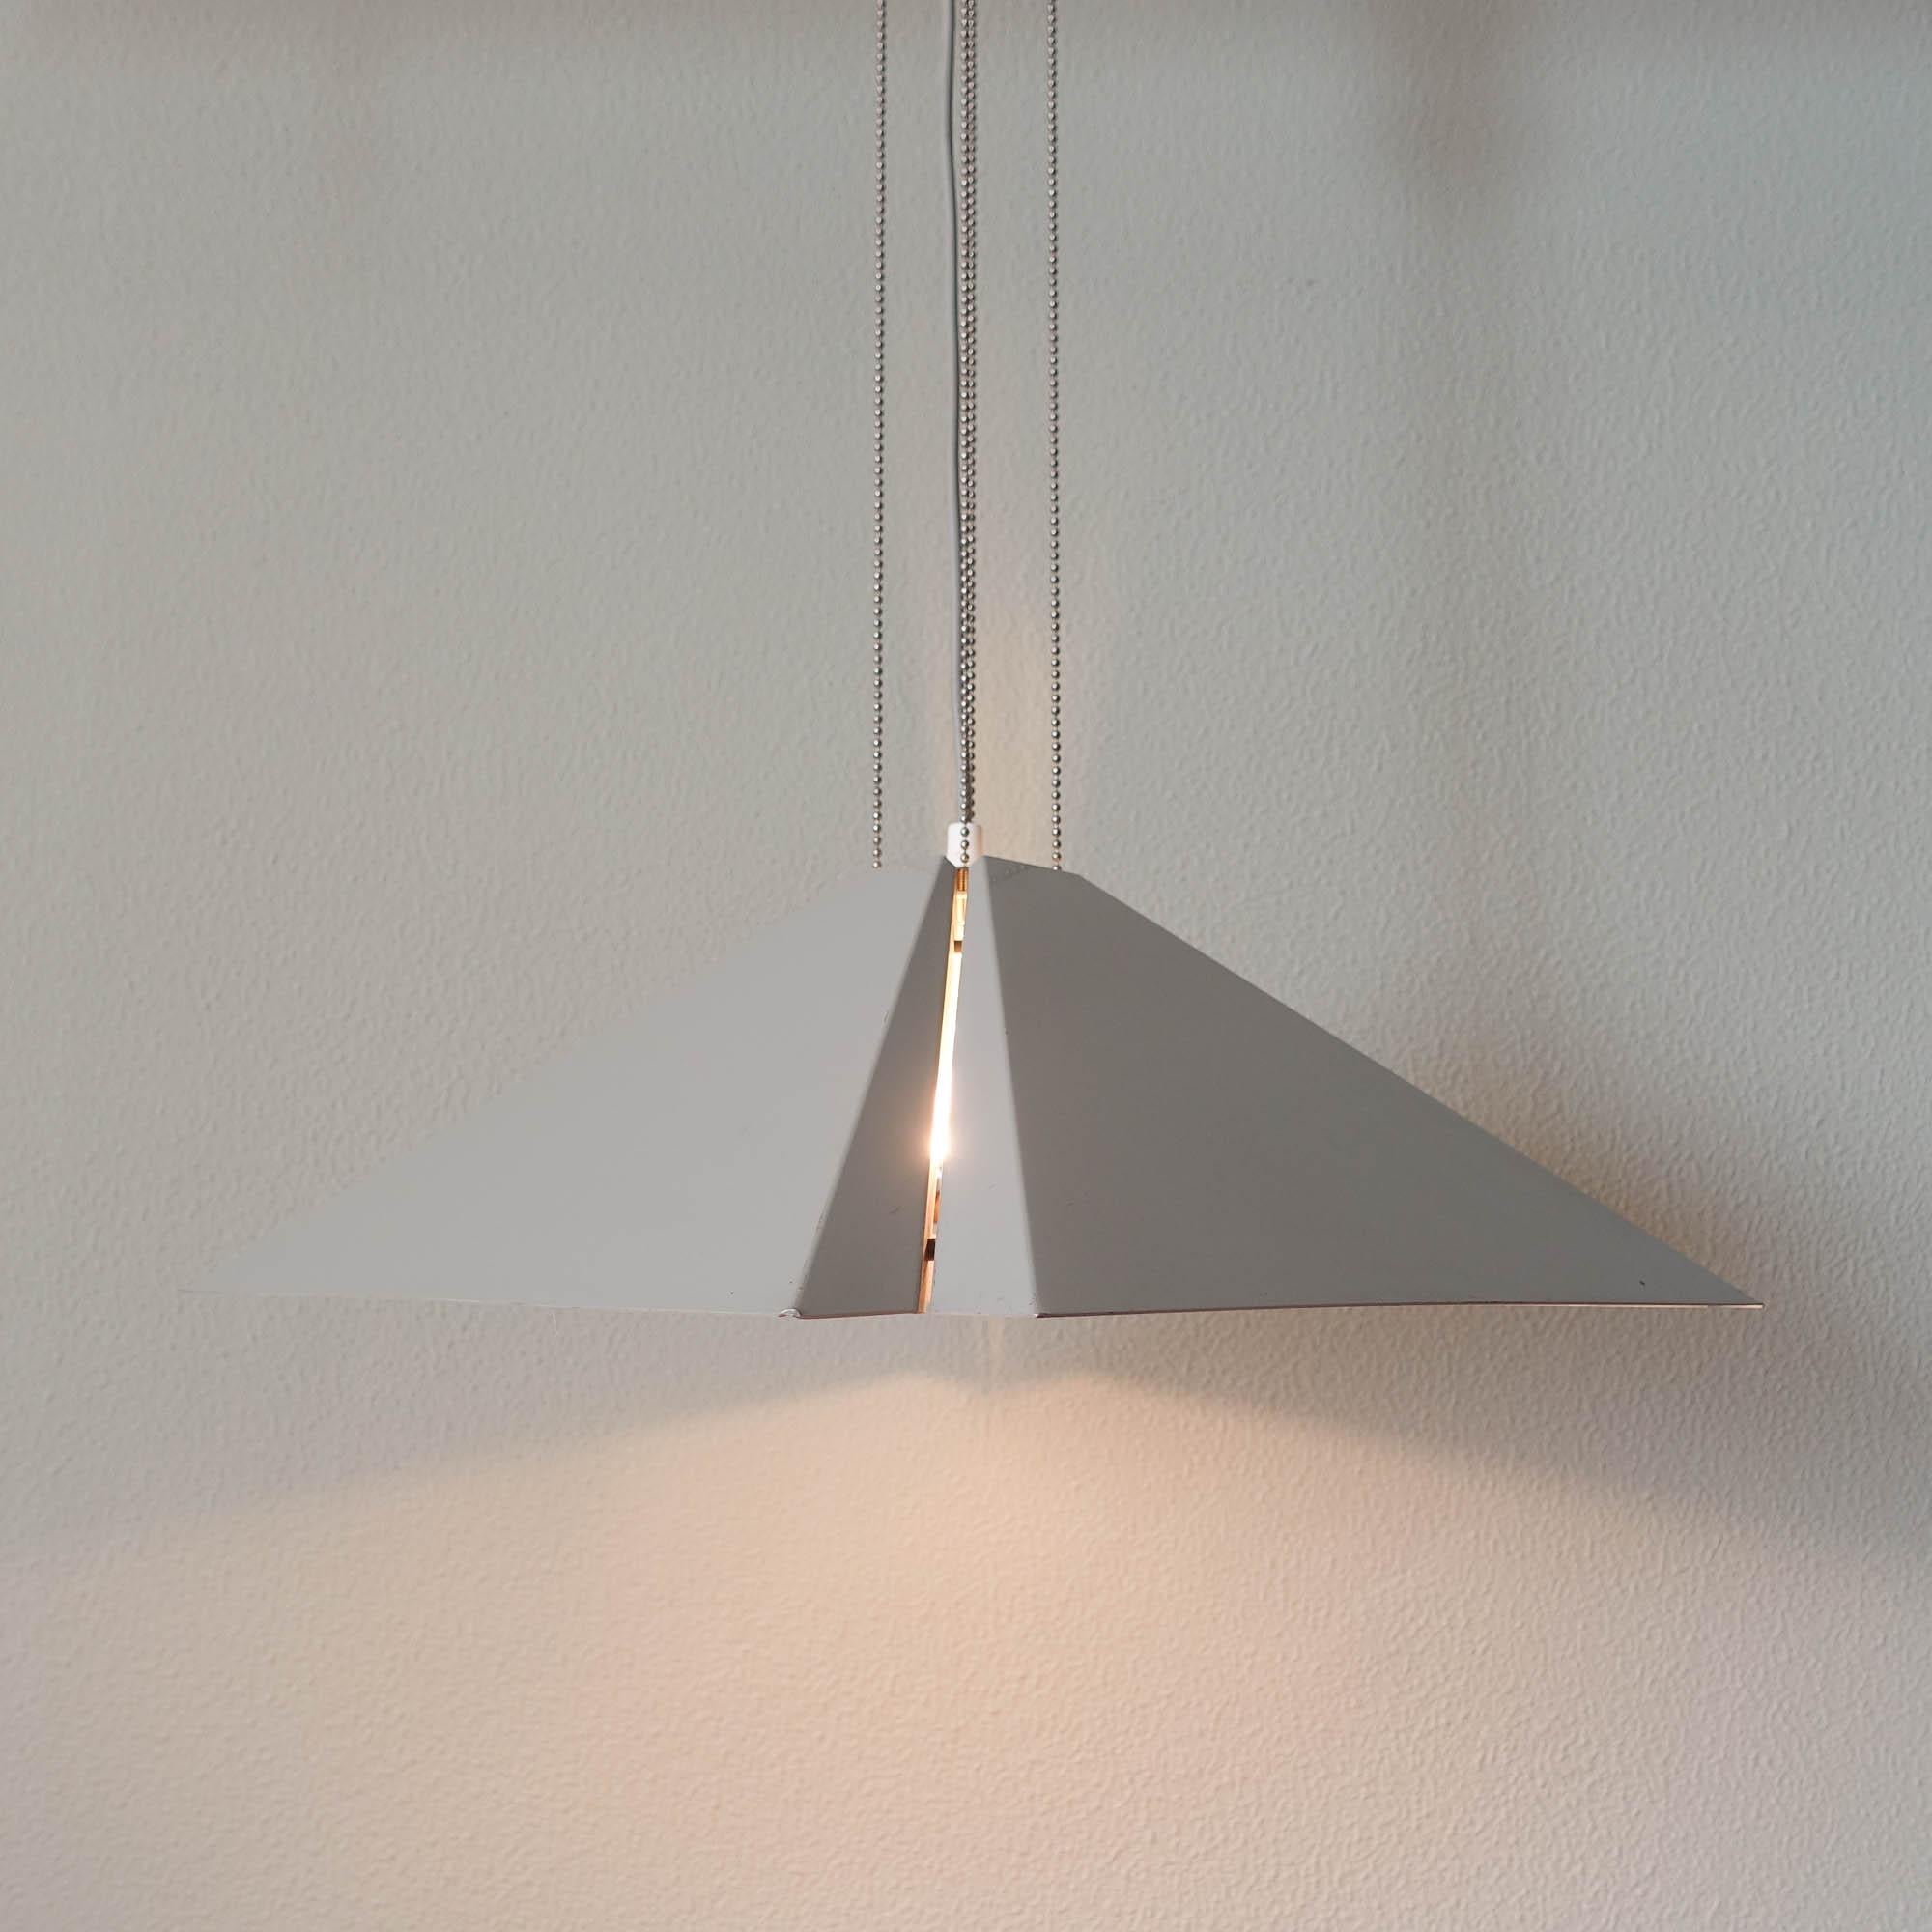 Late 20th Century Dutch Ceiling Light from Dijkstra Lampen, 1970's